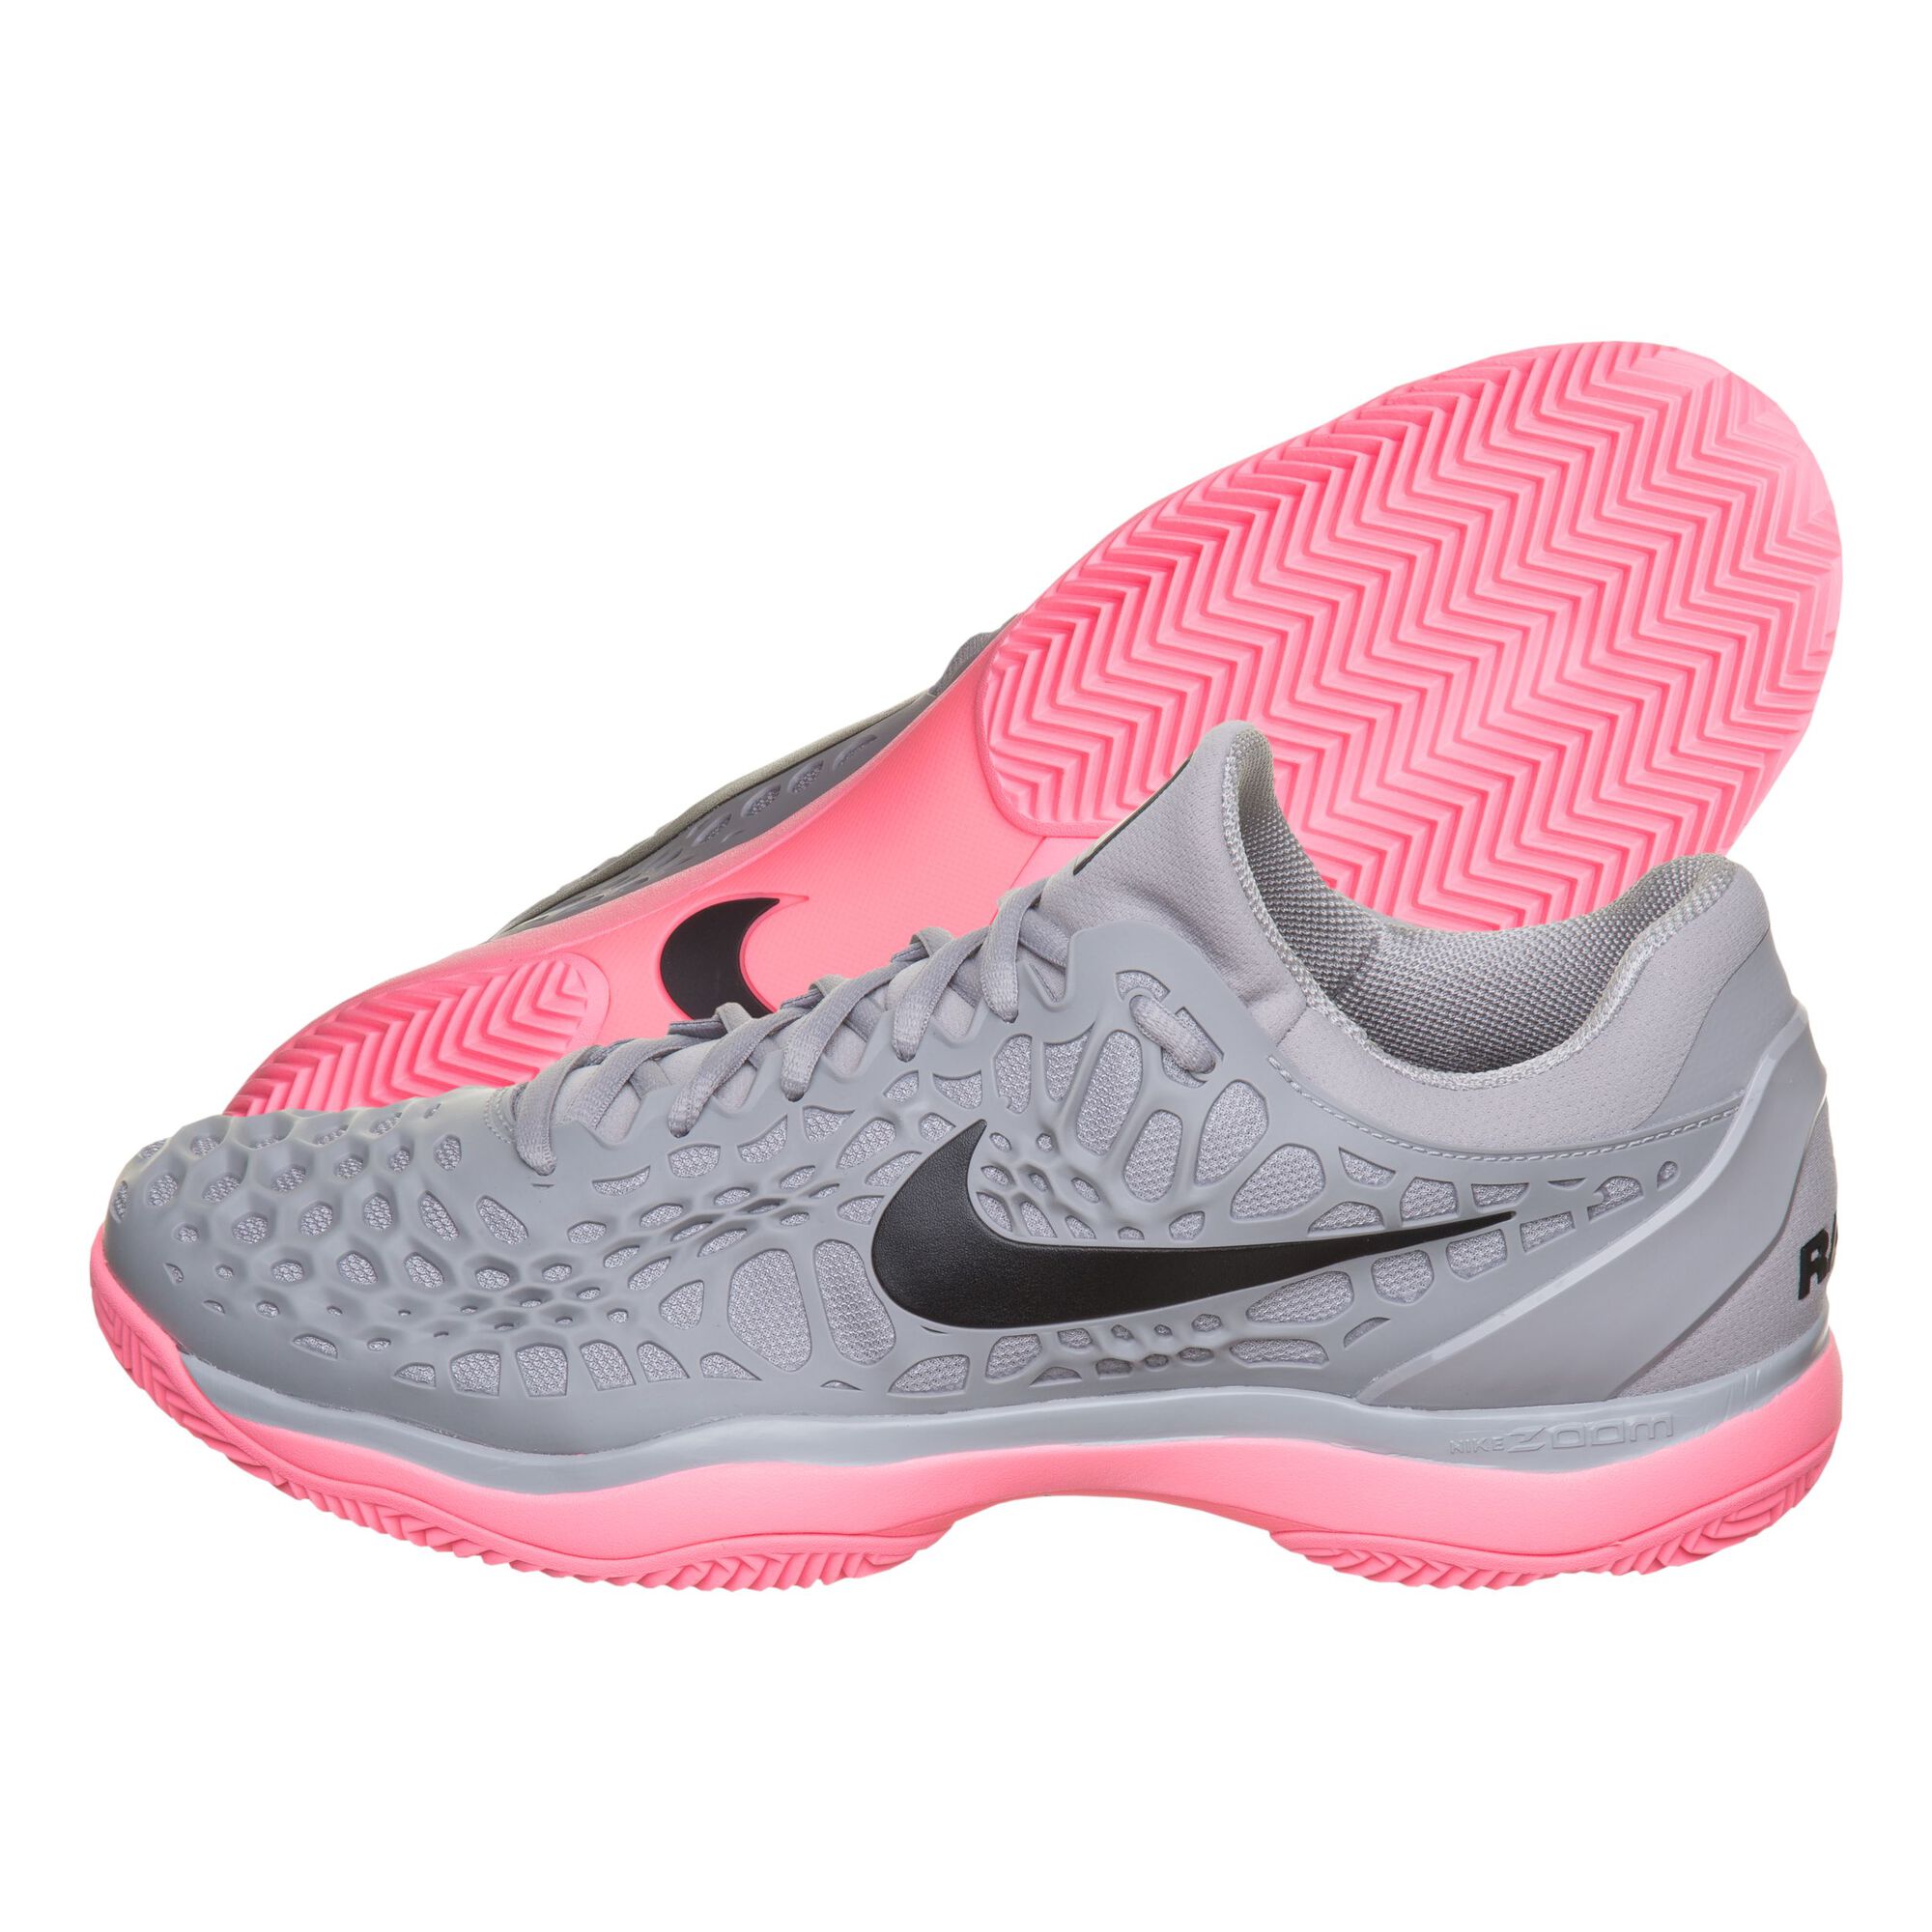 Nike Zoom Cage 3 Court Shoe Special Men - Grey, Pink online | Tennis-Point